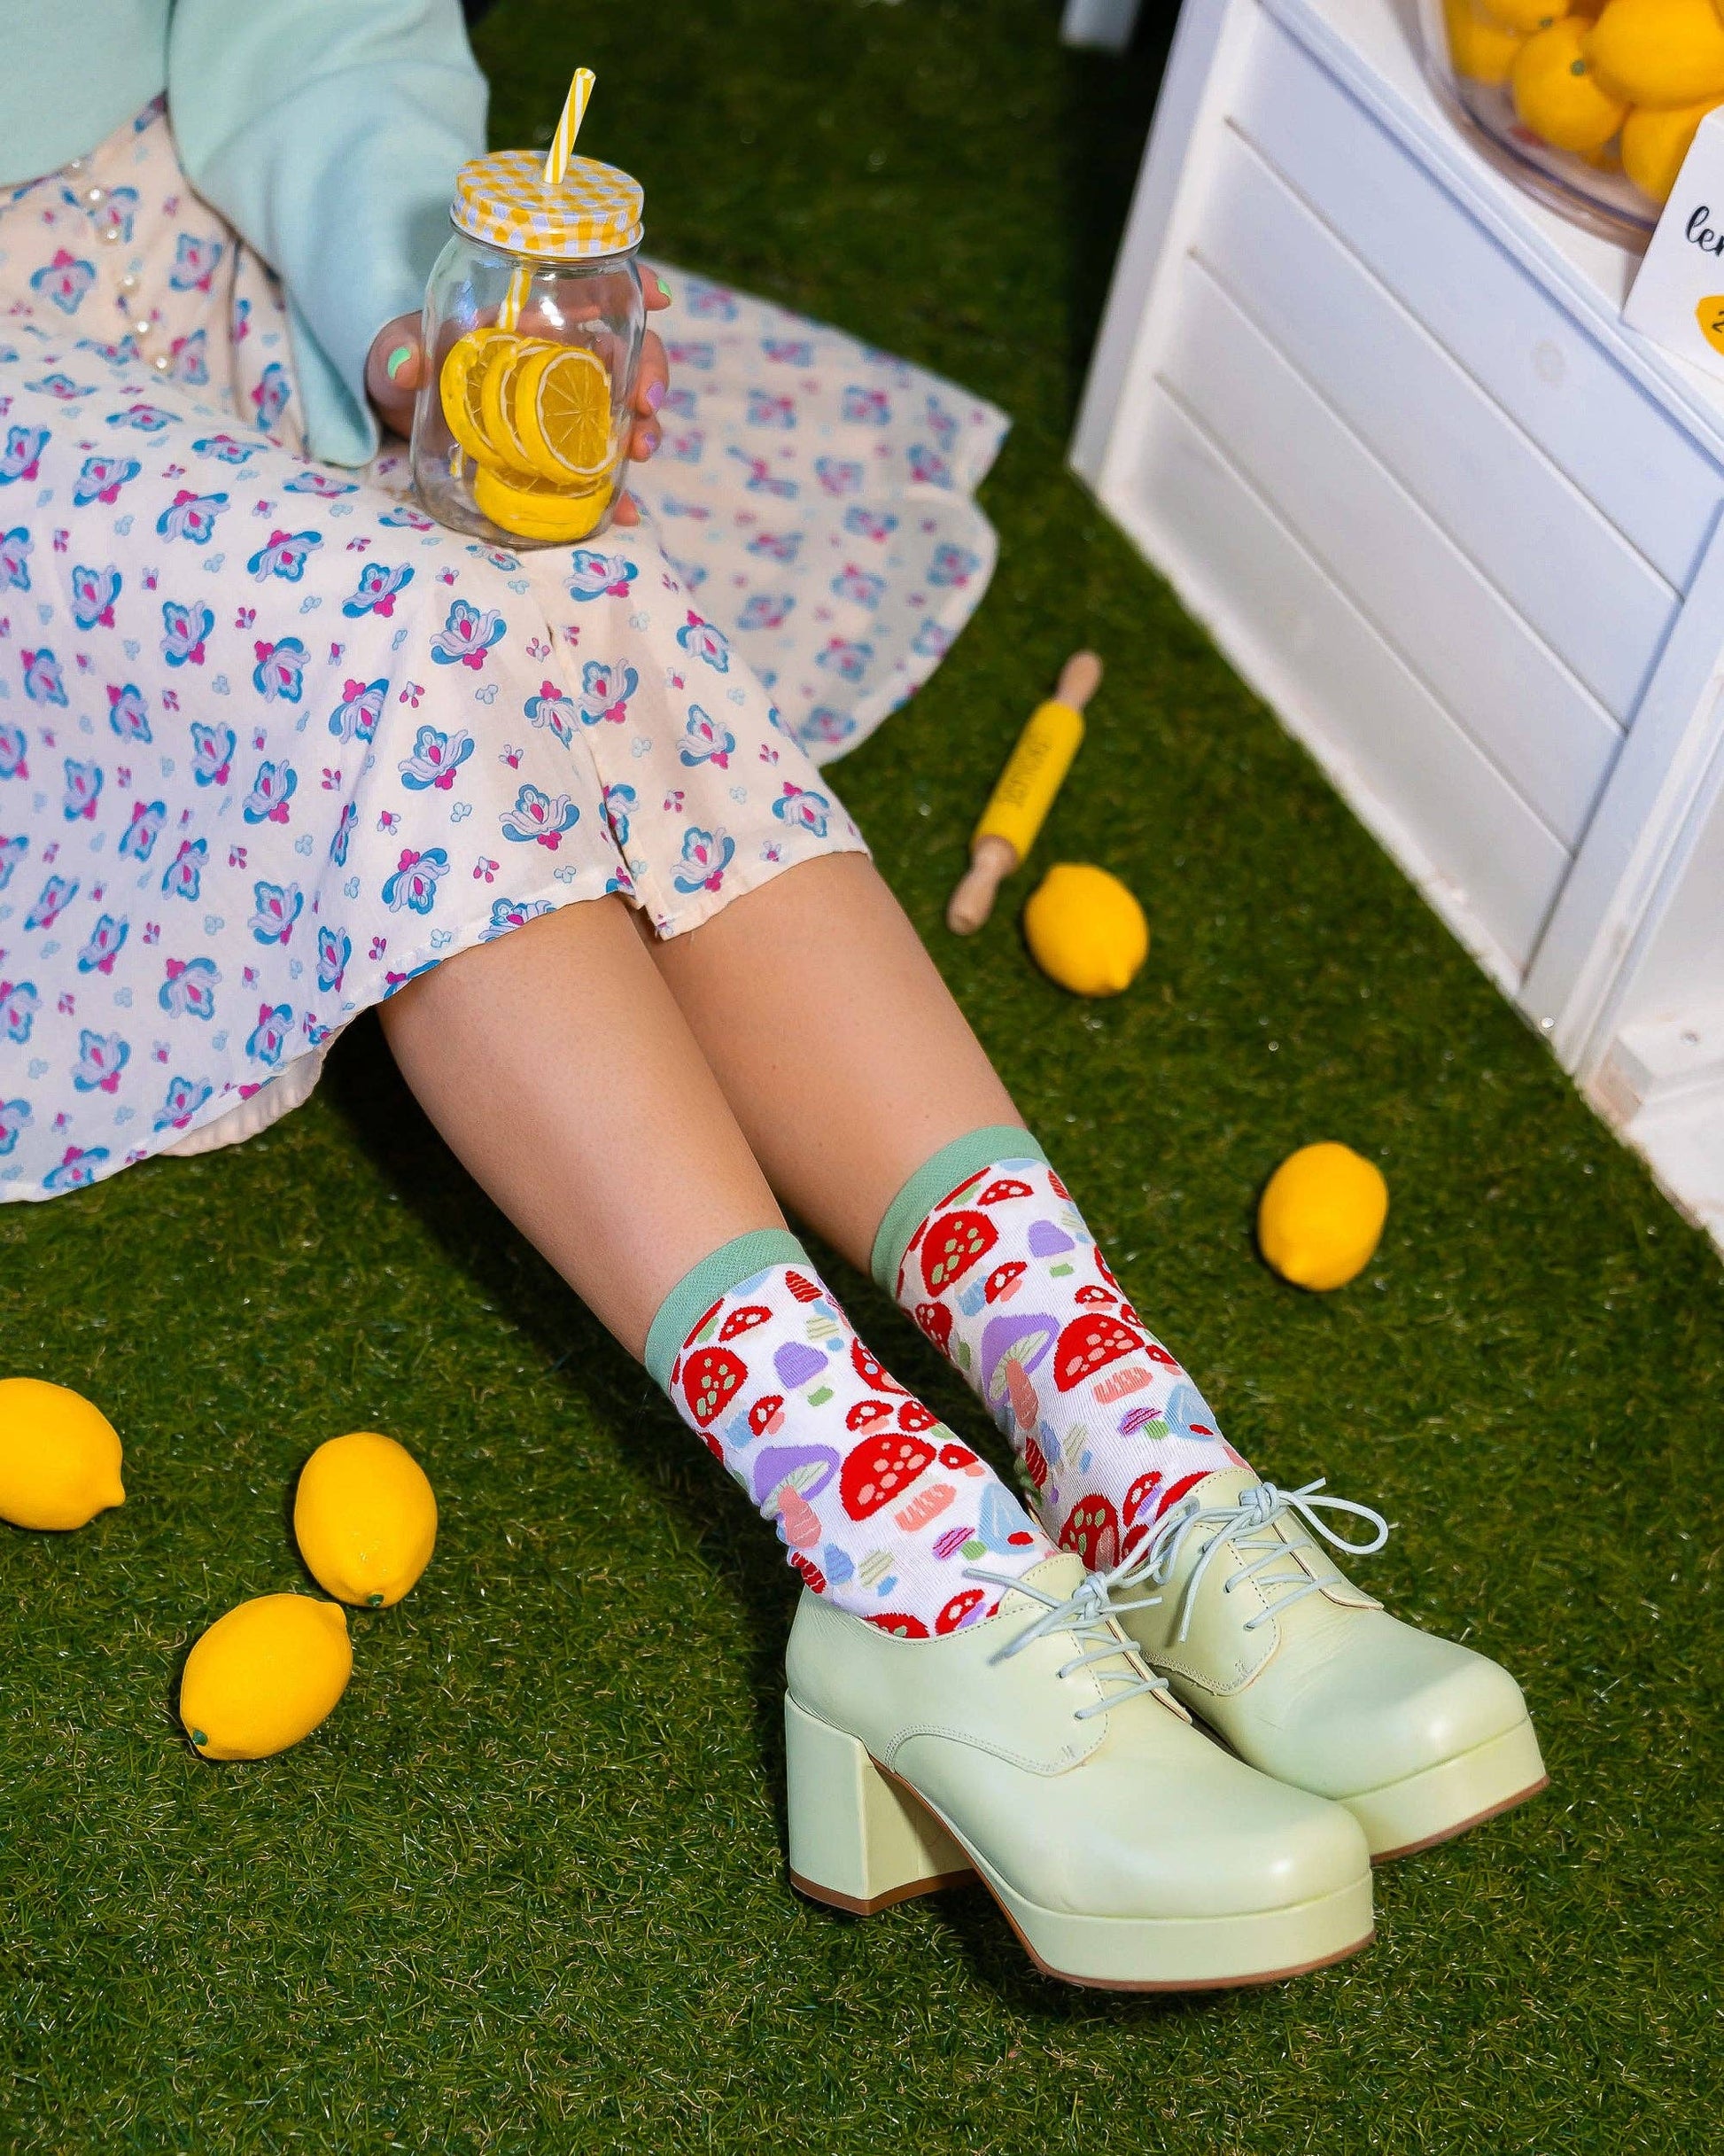 Mushroom socks with forest green toe and heel. Model is sitting on astroturf with rings on her fingers and lemonade